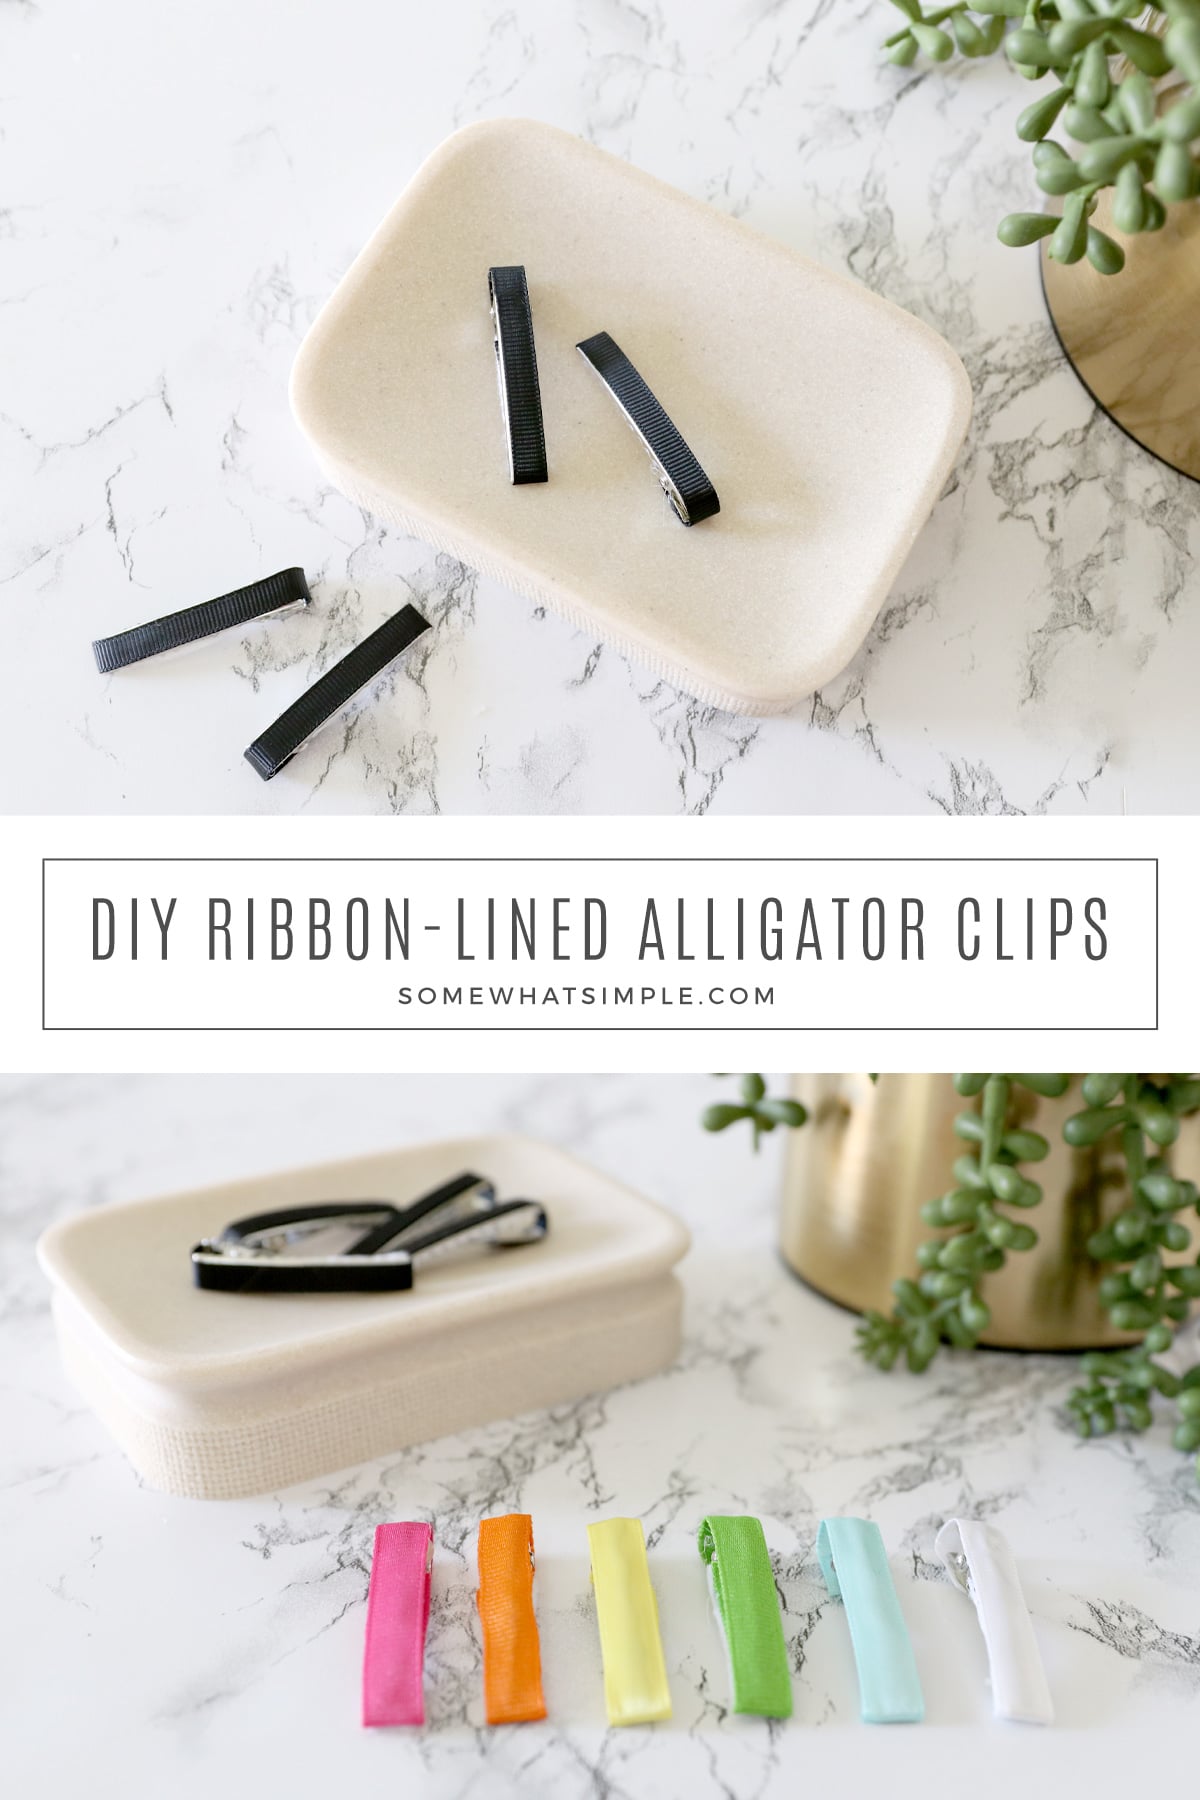 Making your own hairbows? Here's how to make a ribbon lined alligator clip that won't slip out of your daughter's fine hair! #clip #hairbow #tutorial #alligator via @somewhatsimple